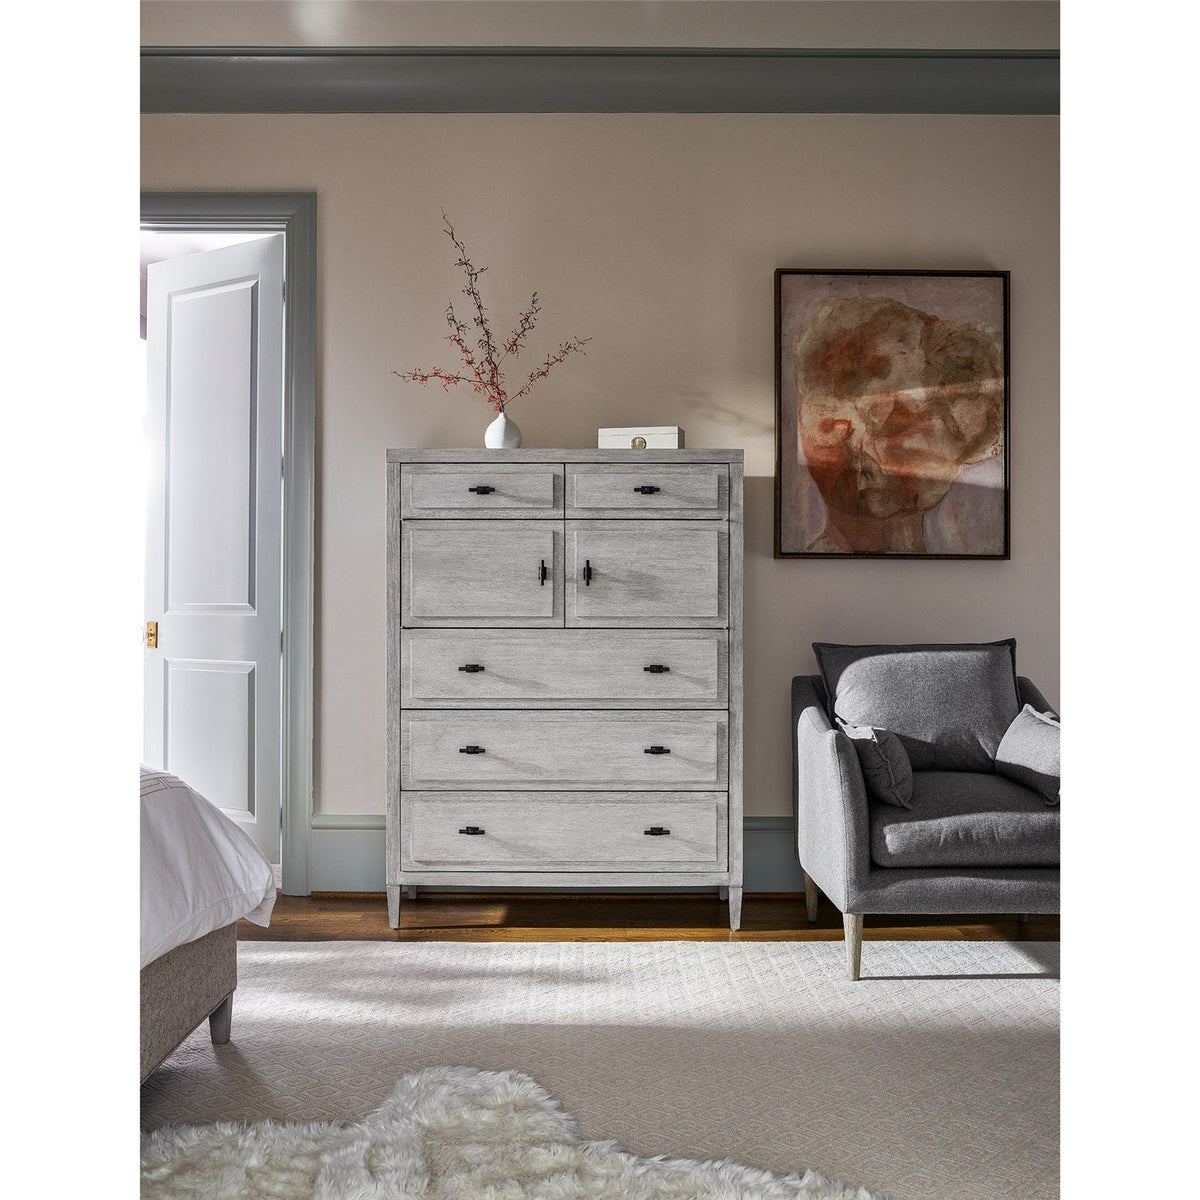 Dressing Chest - Be Bold Furniture